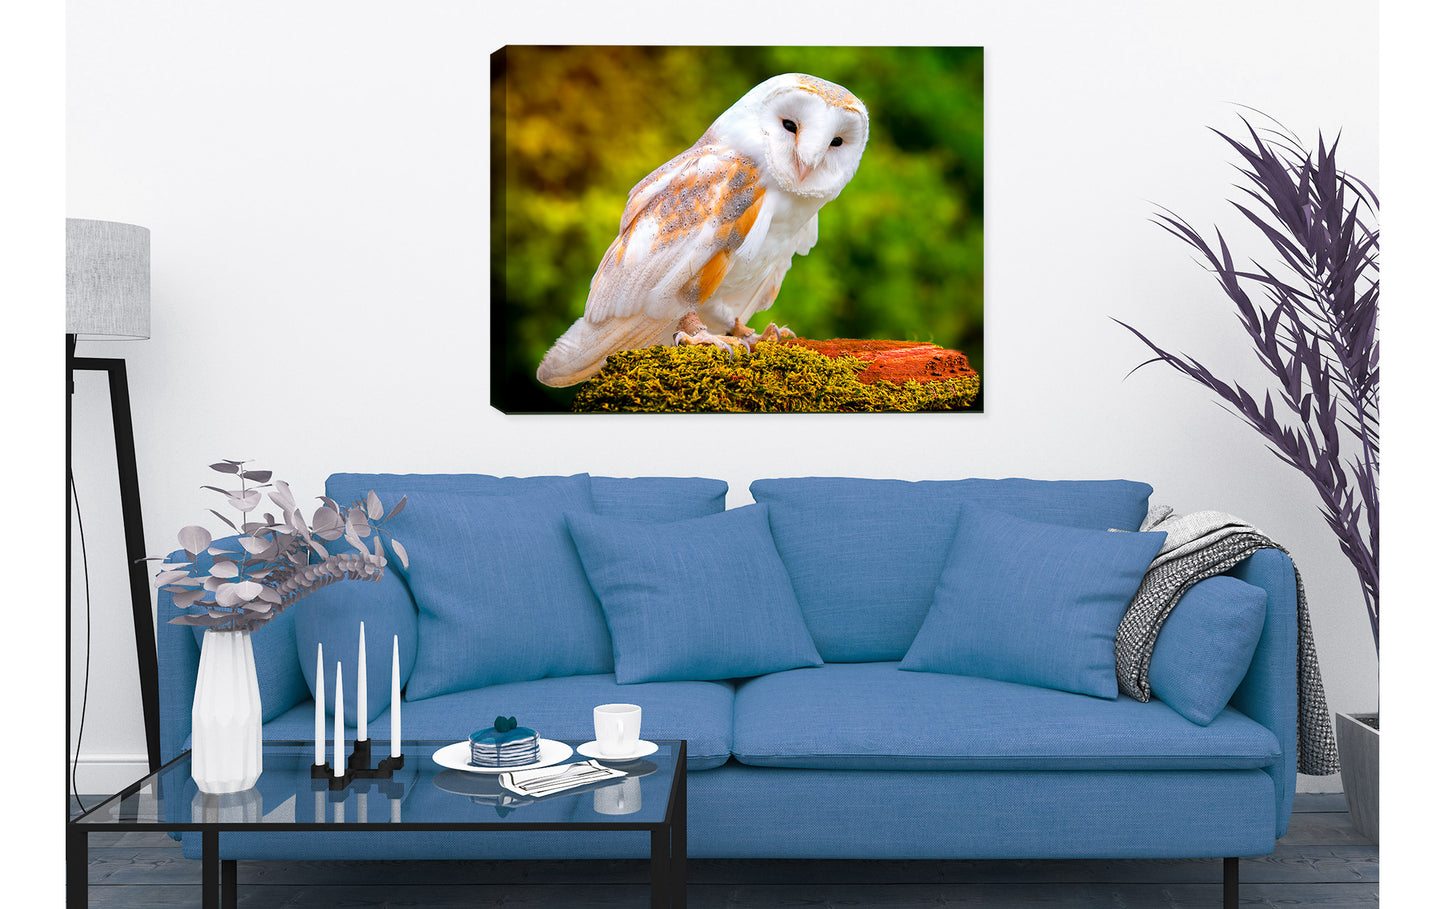 Owl Photo on Canvas in Living Room